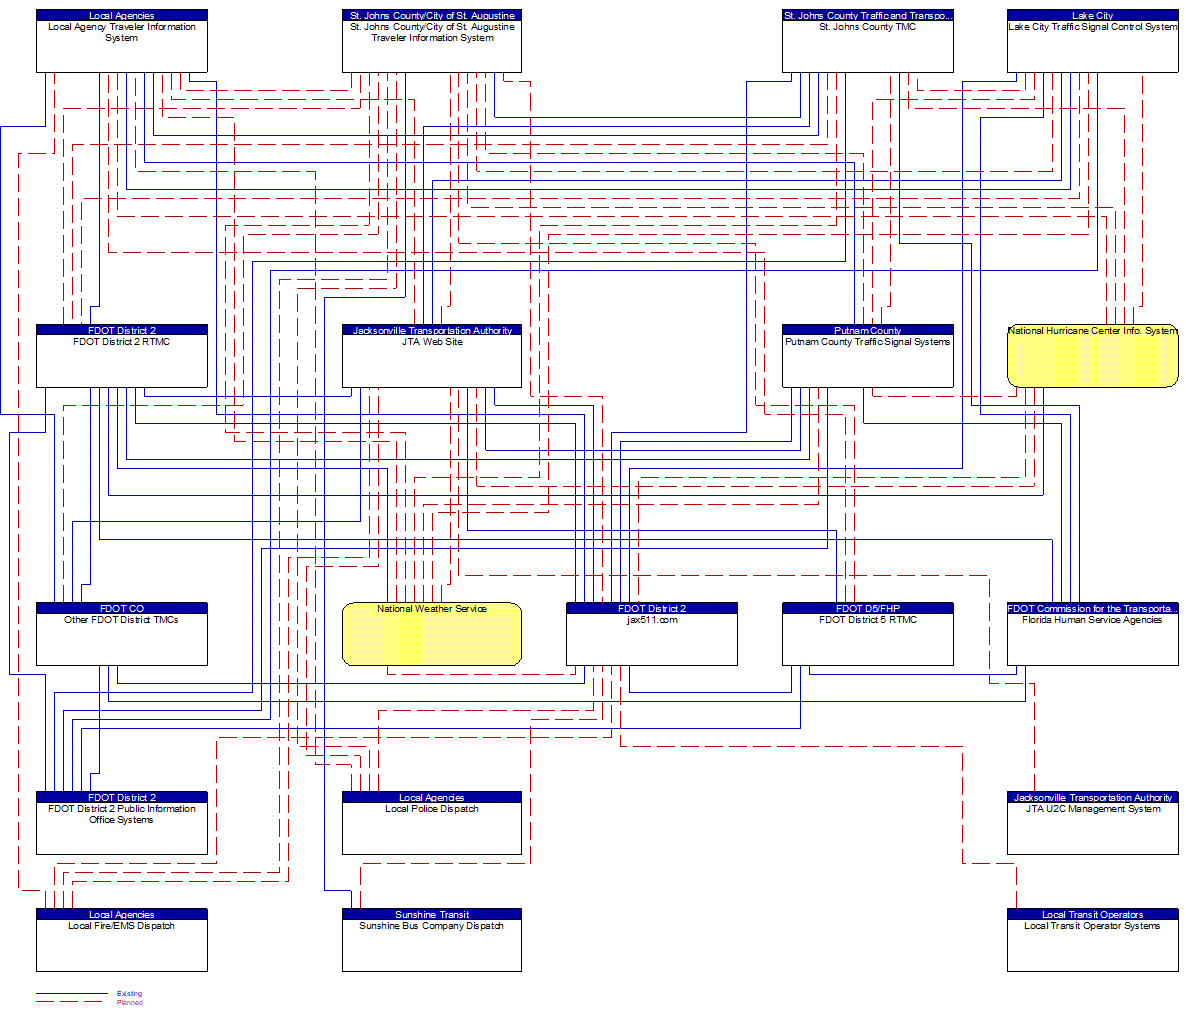 Service Graphic: Broadcast Traveler Information (FDOT District 2 (Inputs))